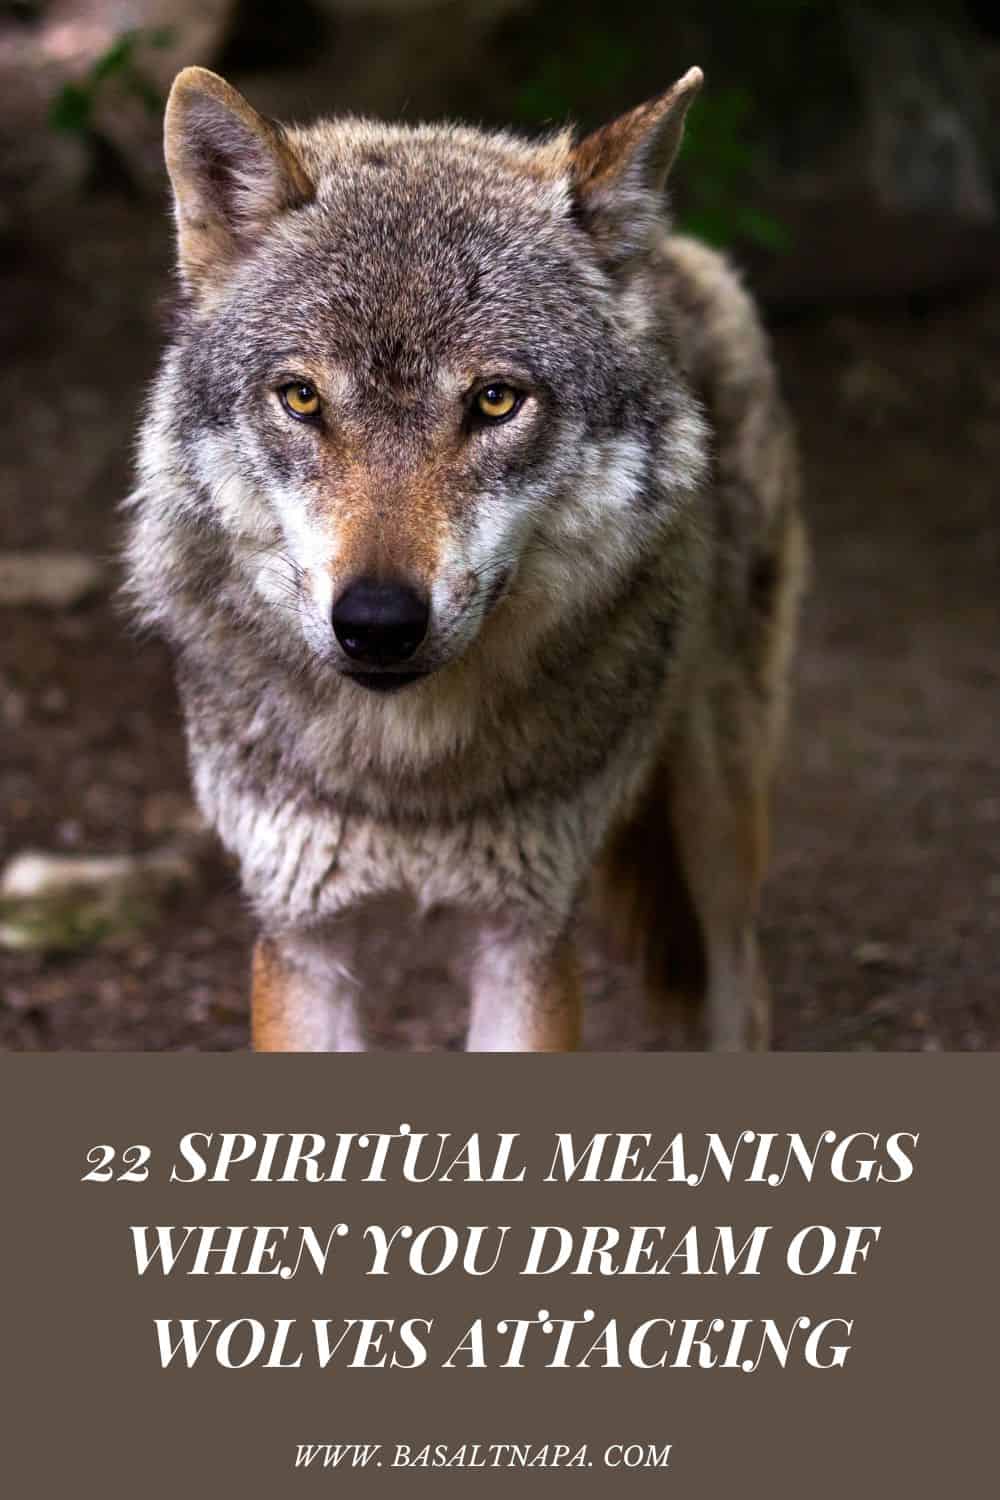 Common dreams about wolves attacking: spiritual meaning and symbolism